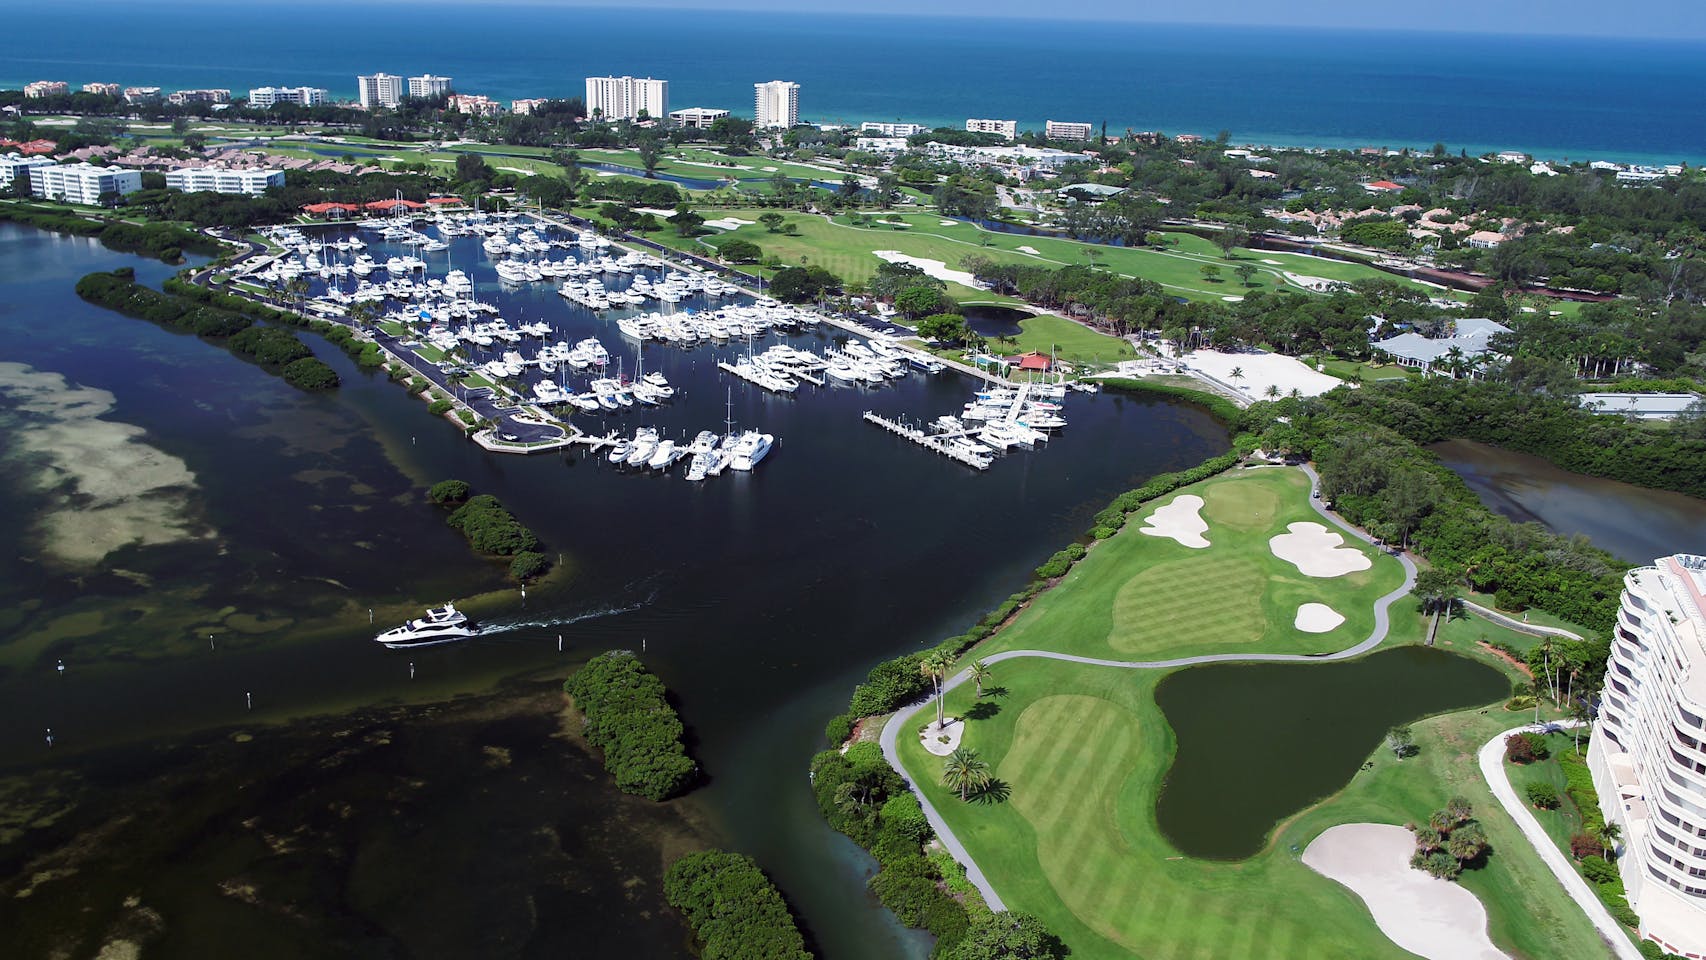 The Longboat Key Club includes resort hotel, golf course, and marina.